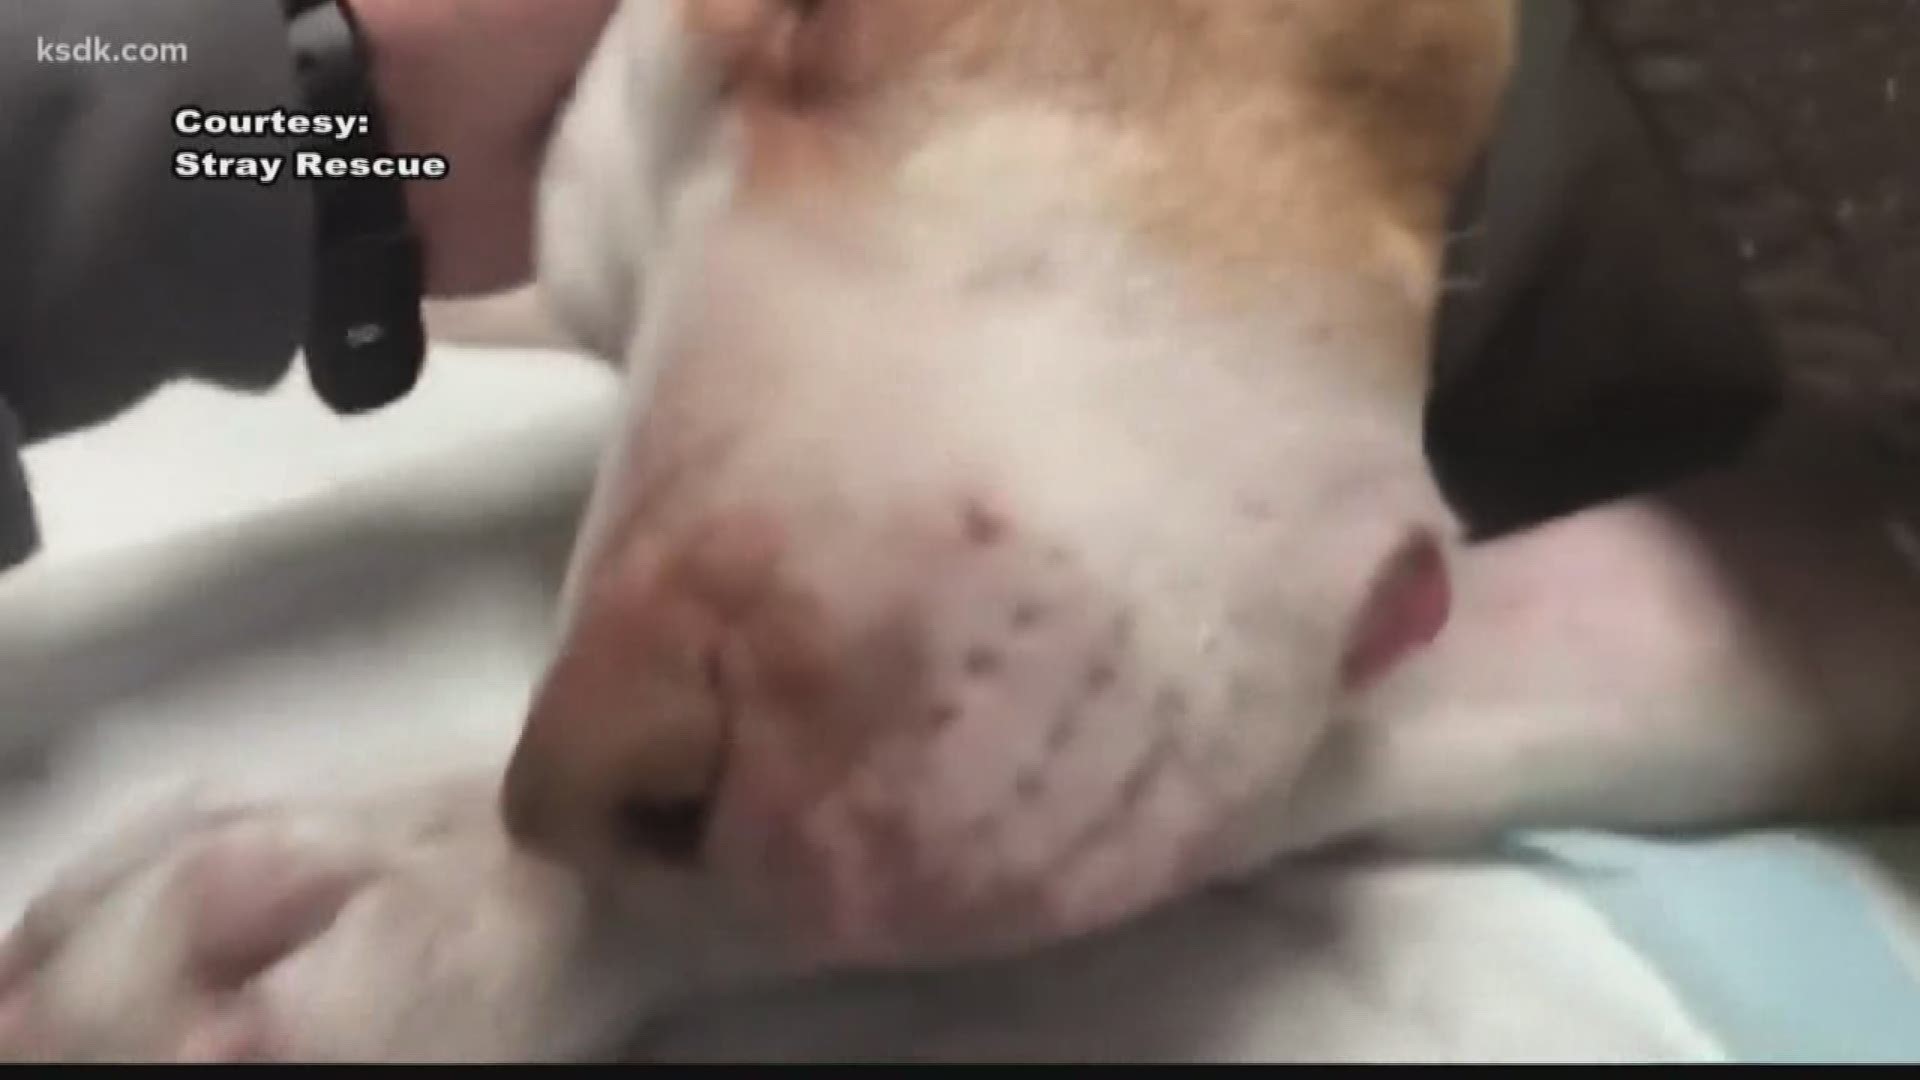 Stray Rescue has issued an apology after the health department received backlash following a dog that was euthanized for biting a veterinarian technician.